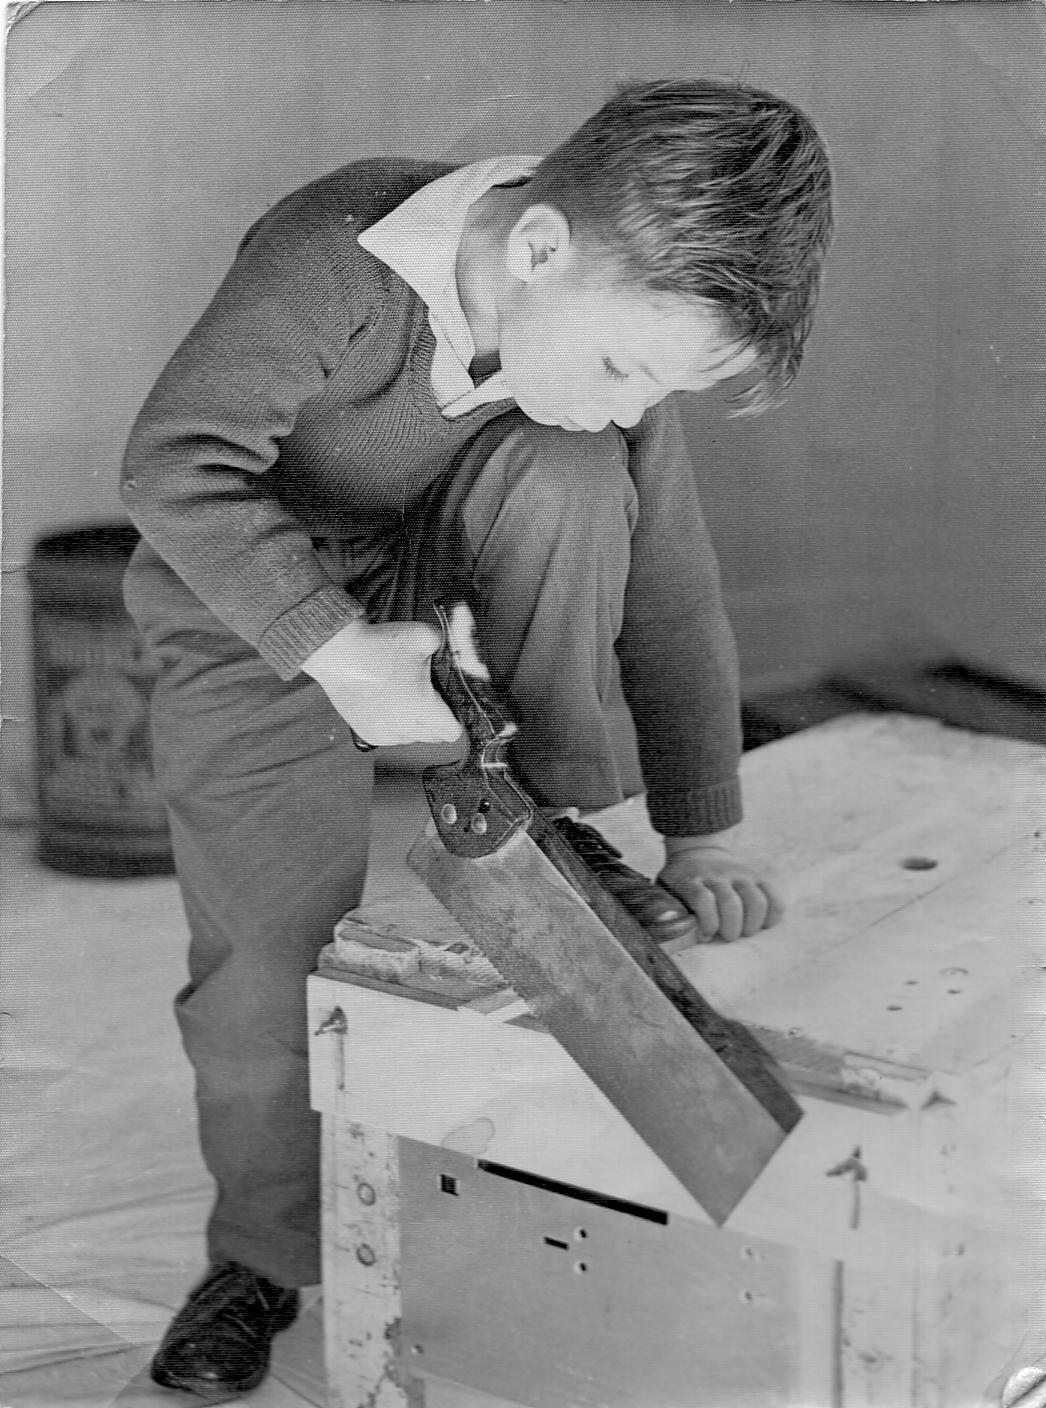 Young bob with saw